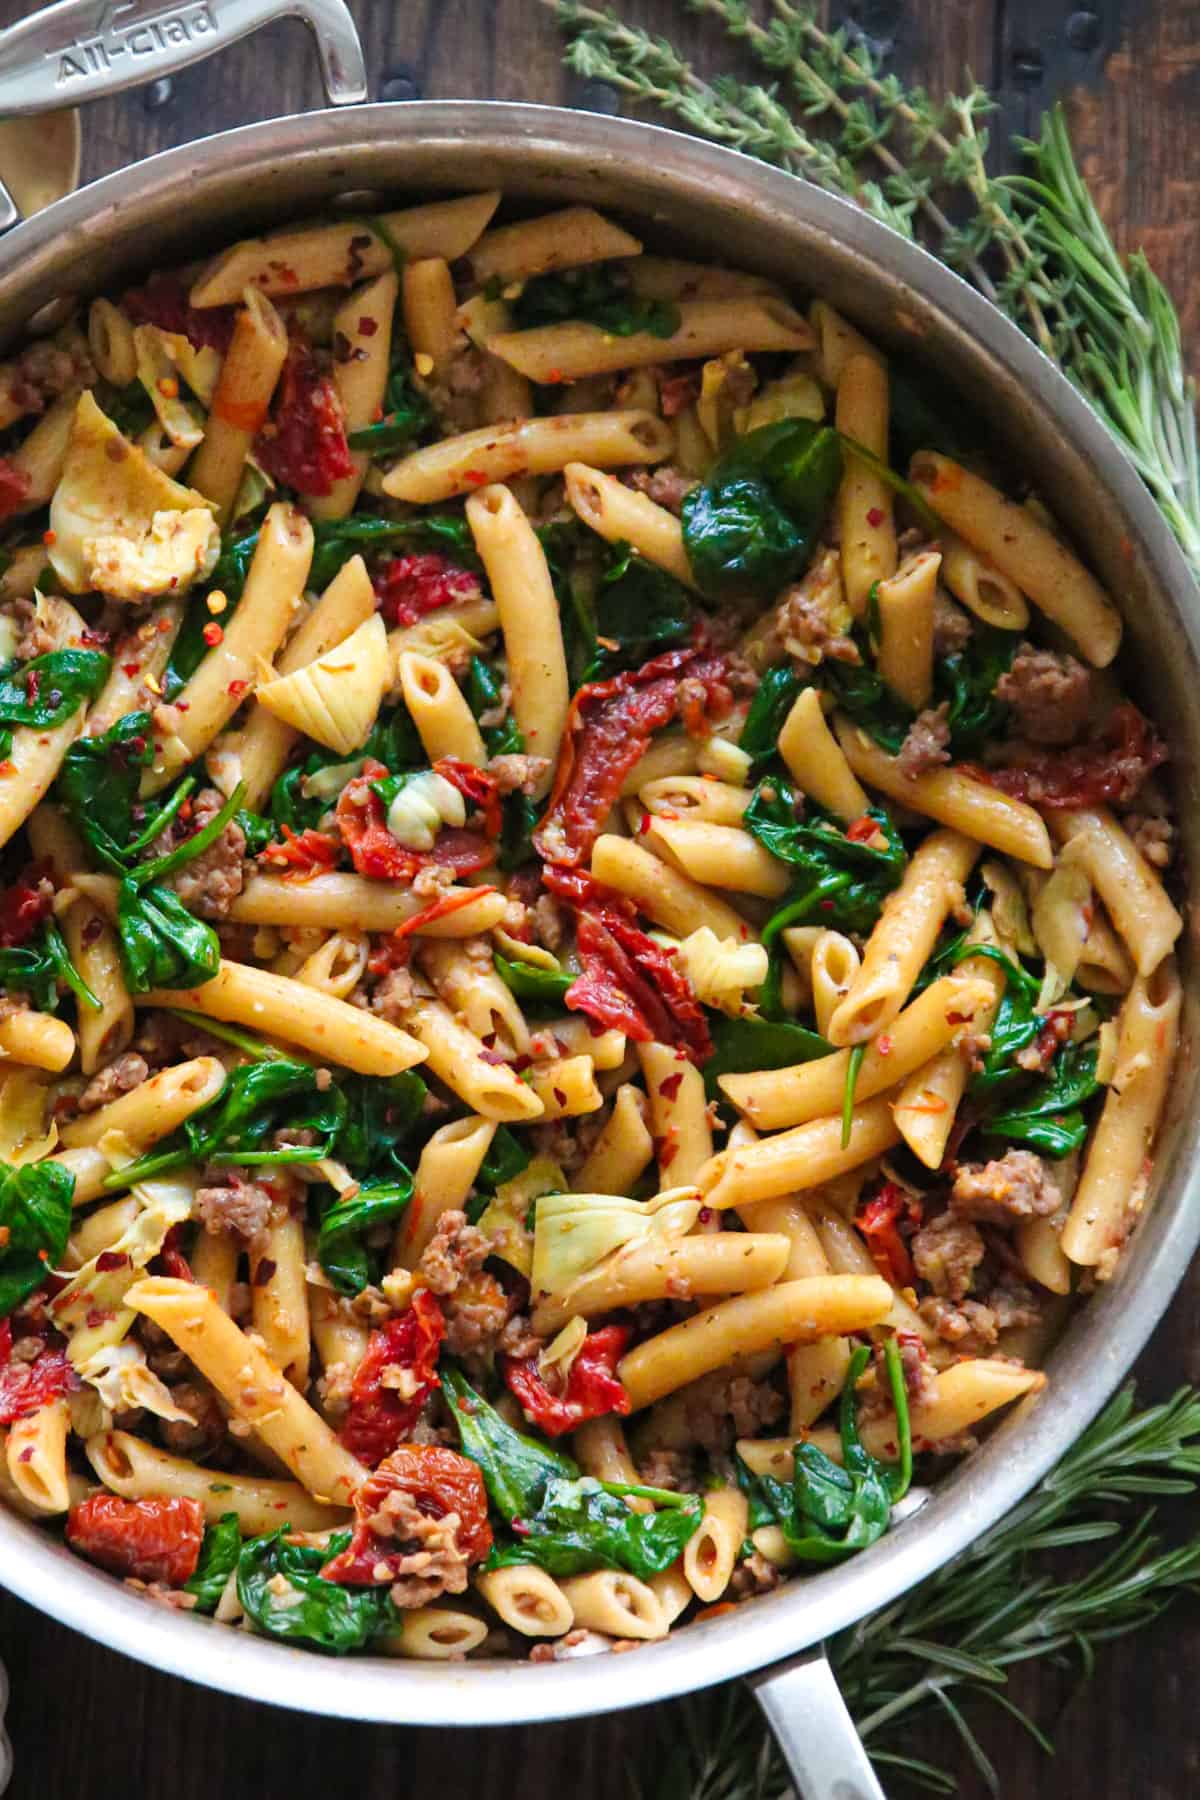 Italian Sausage Pasta with Spinach, Artichokes, and Sun-Dried Tomatoes - in a stainless steel skillet.